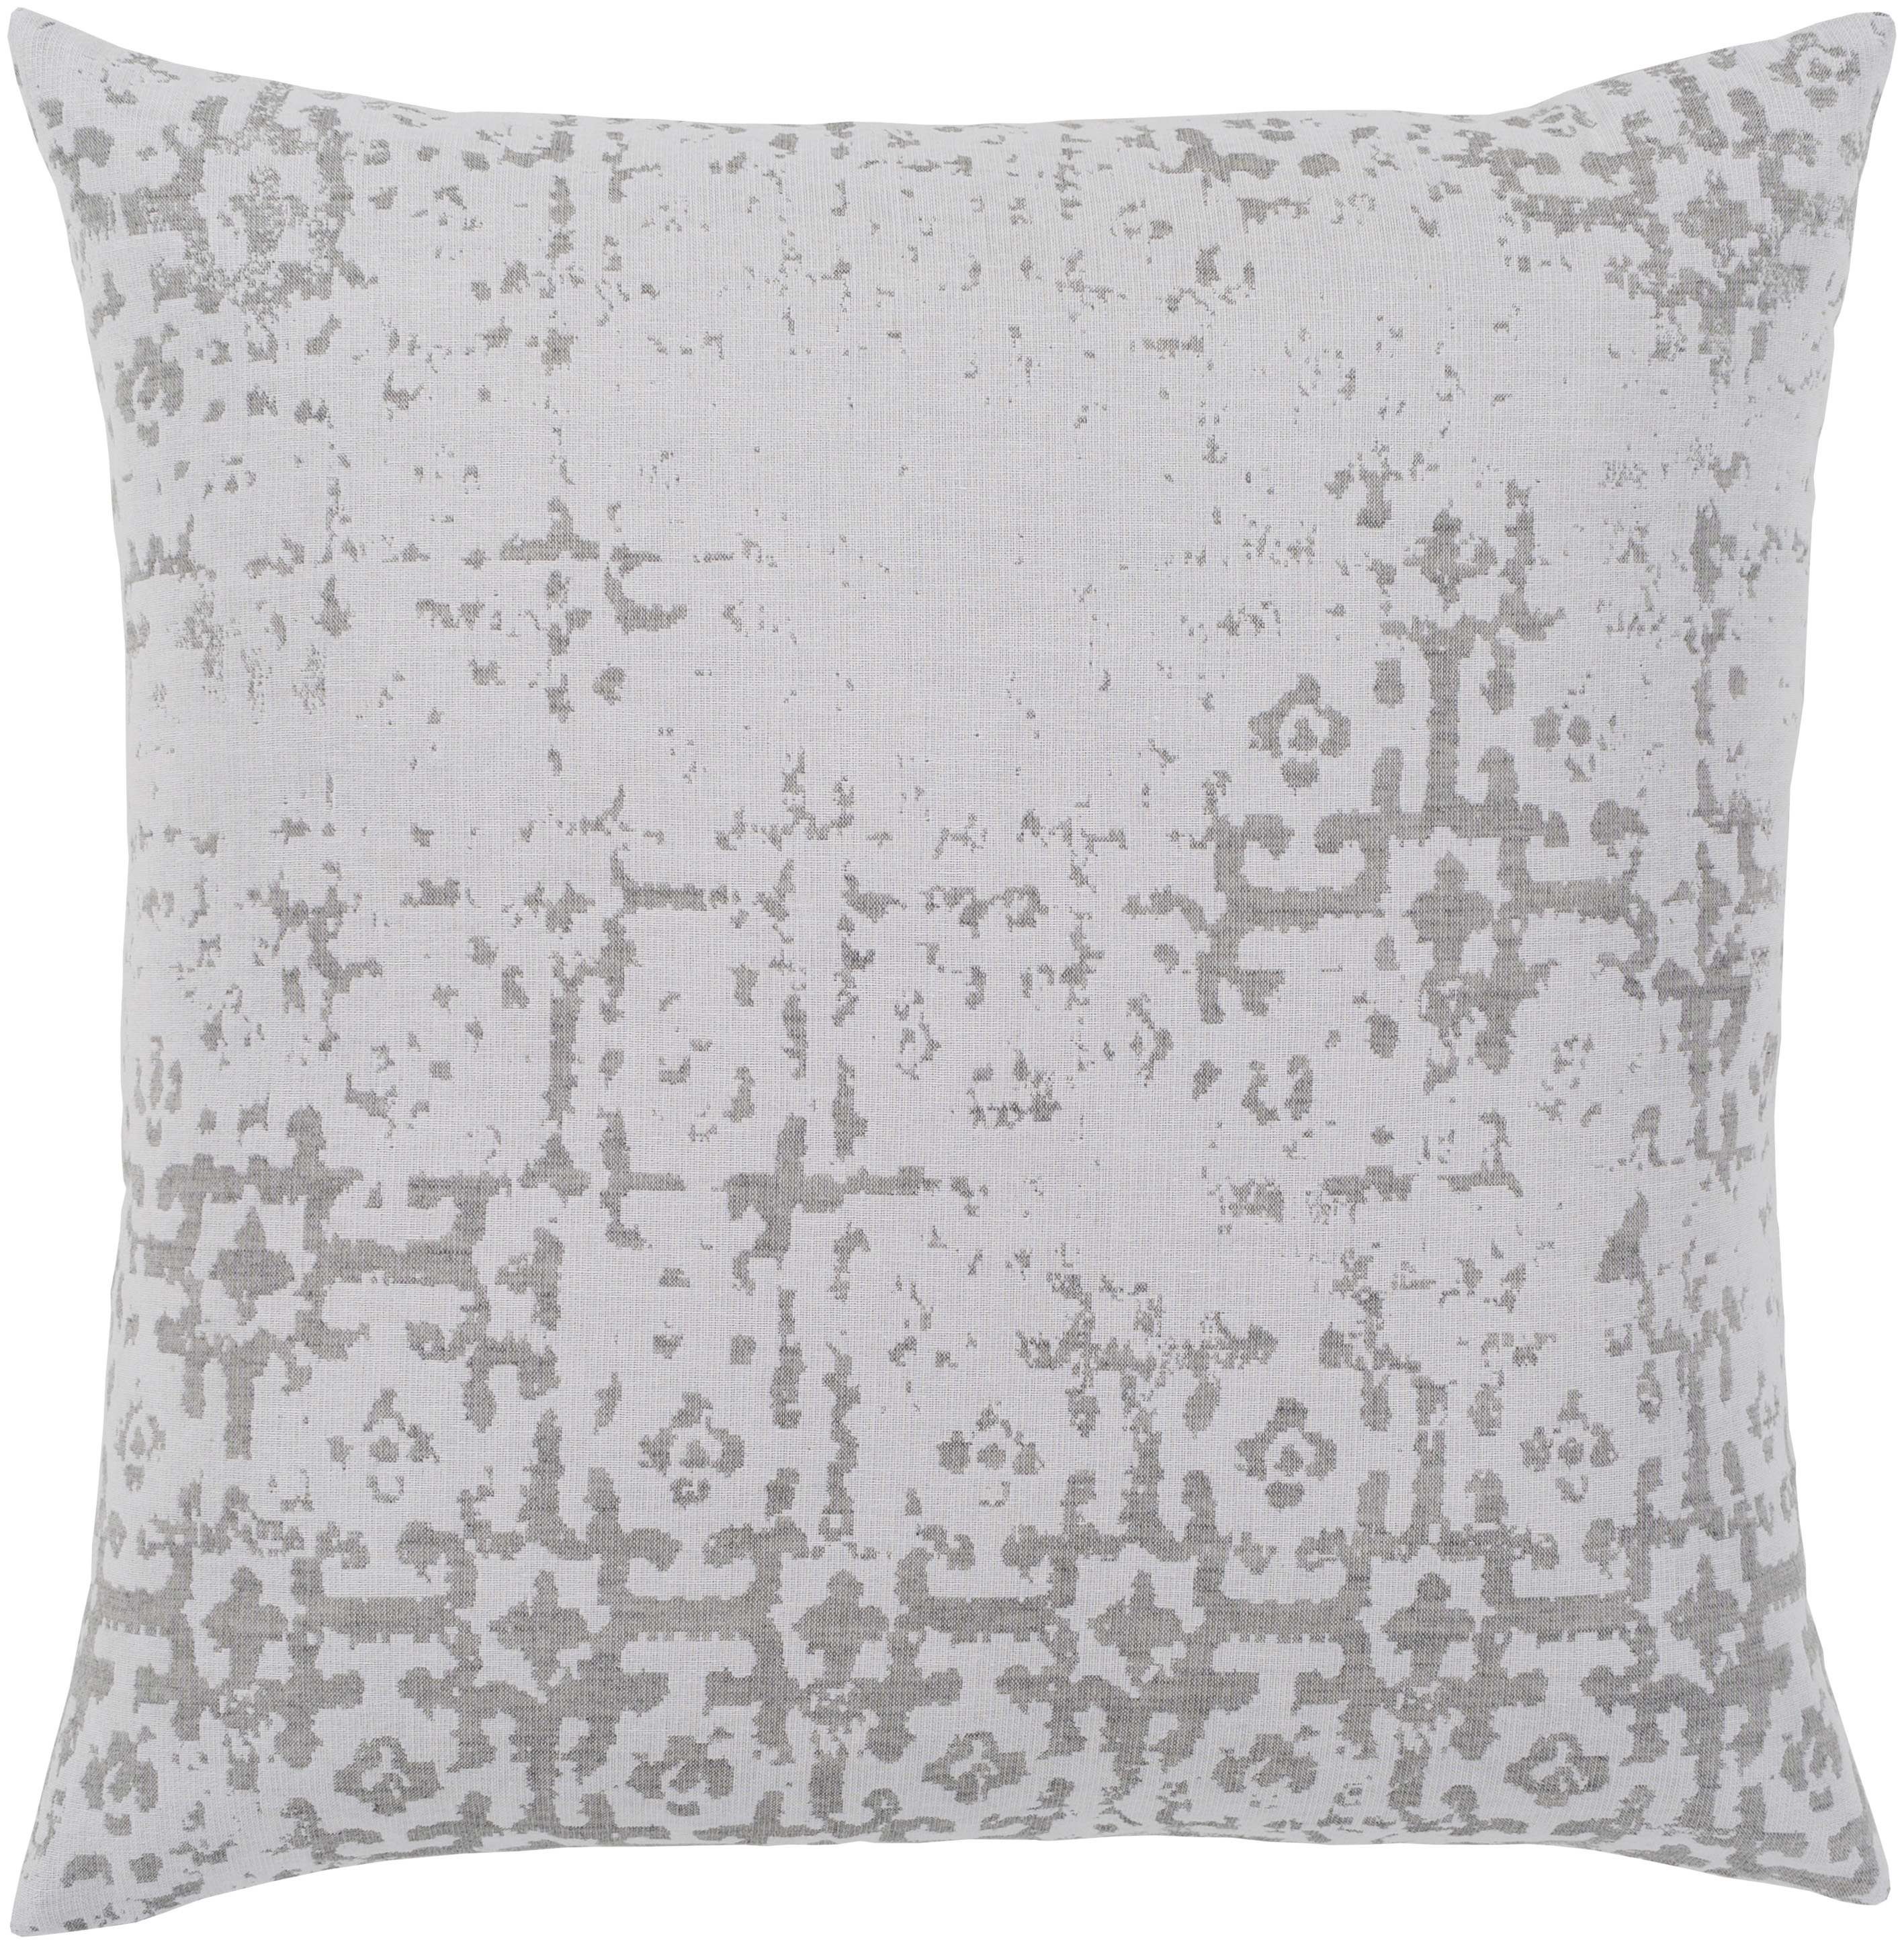 Abstraction Throw Pillow, 18" x 18", with poly insert - Image 0